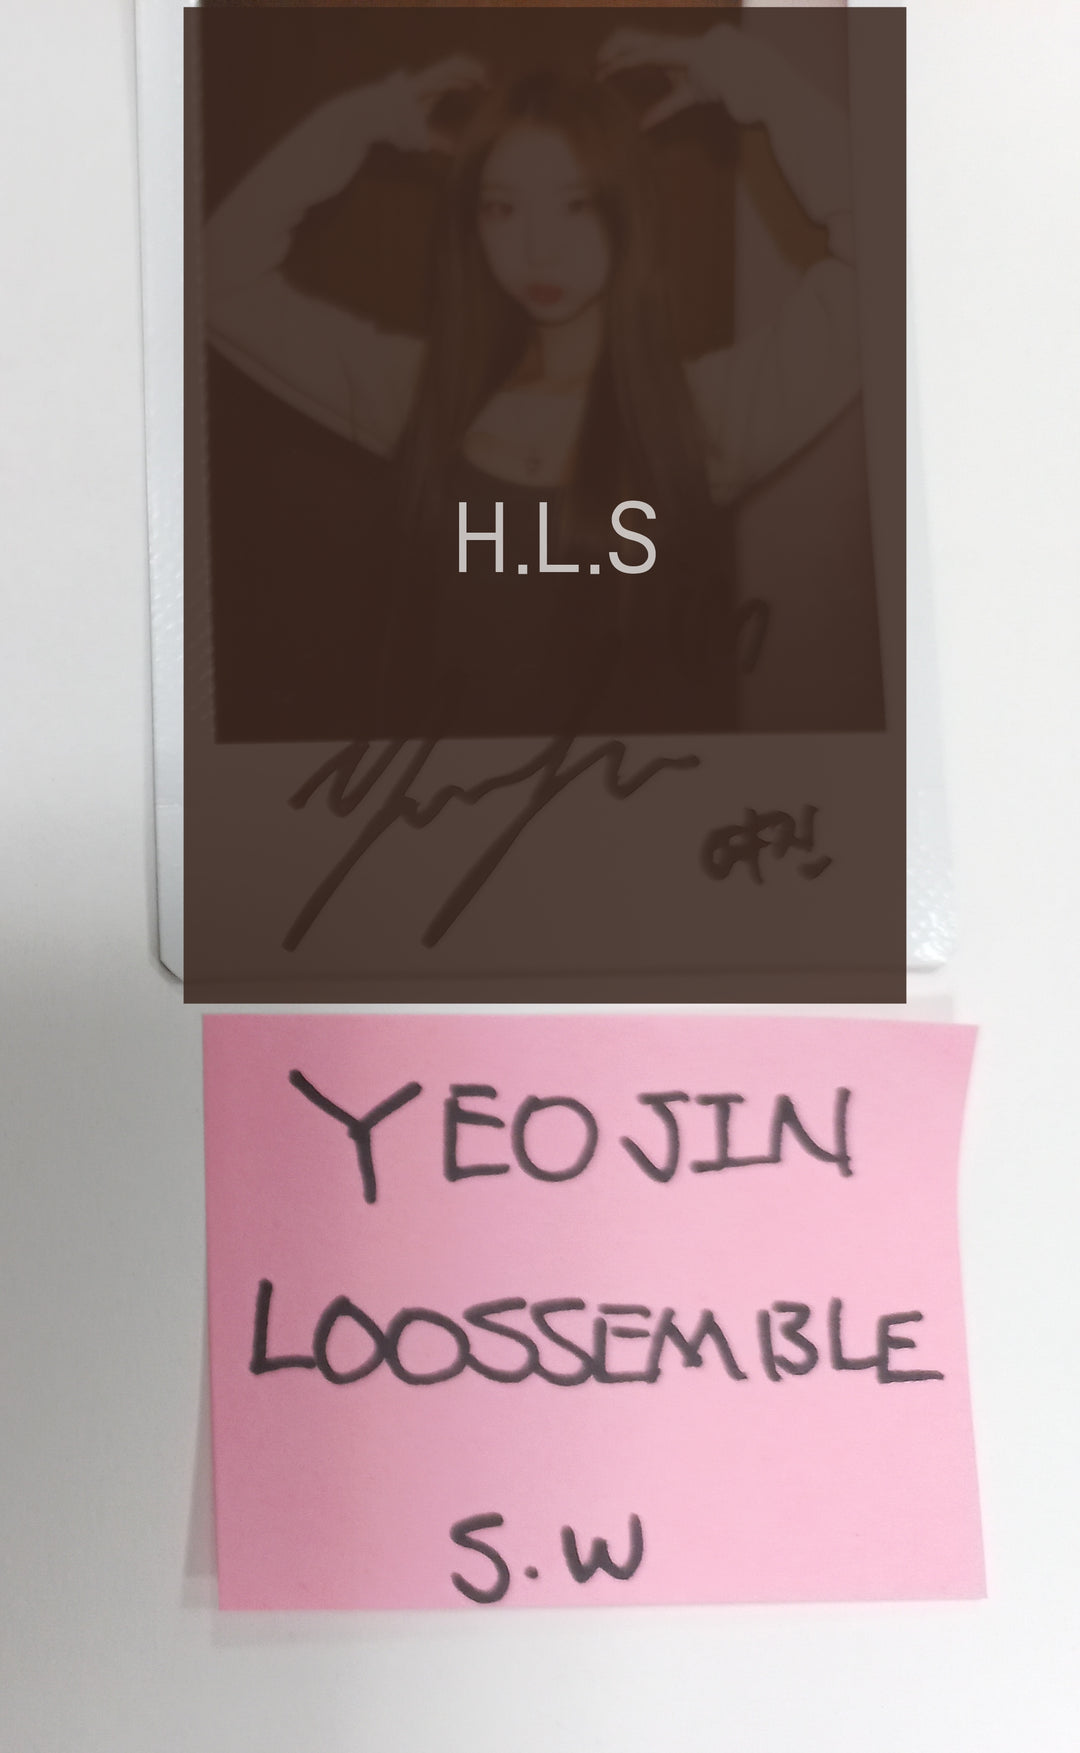 YEOJIN (Of LOOSSEMBLE) "LOOSSEMBLE" - Hand Autographed(Signed) Polaroid [23.10.25]